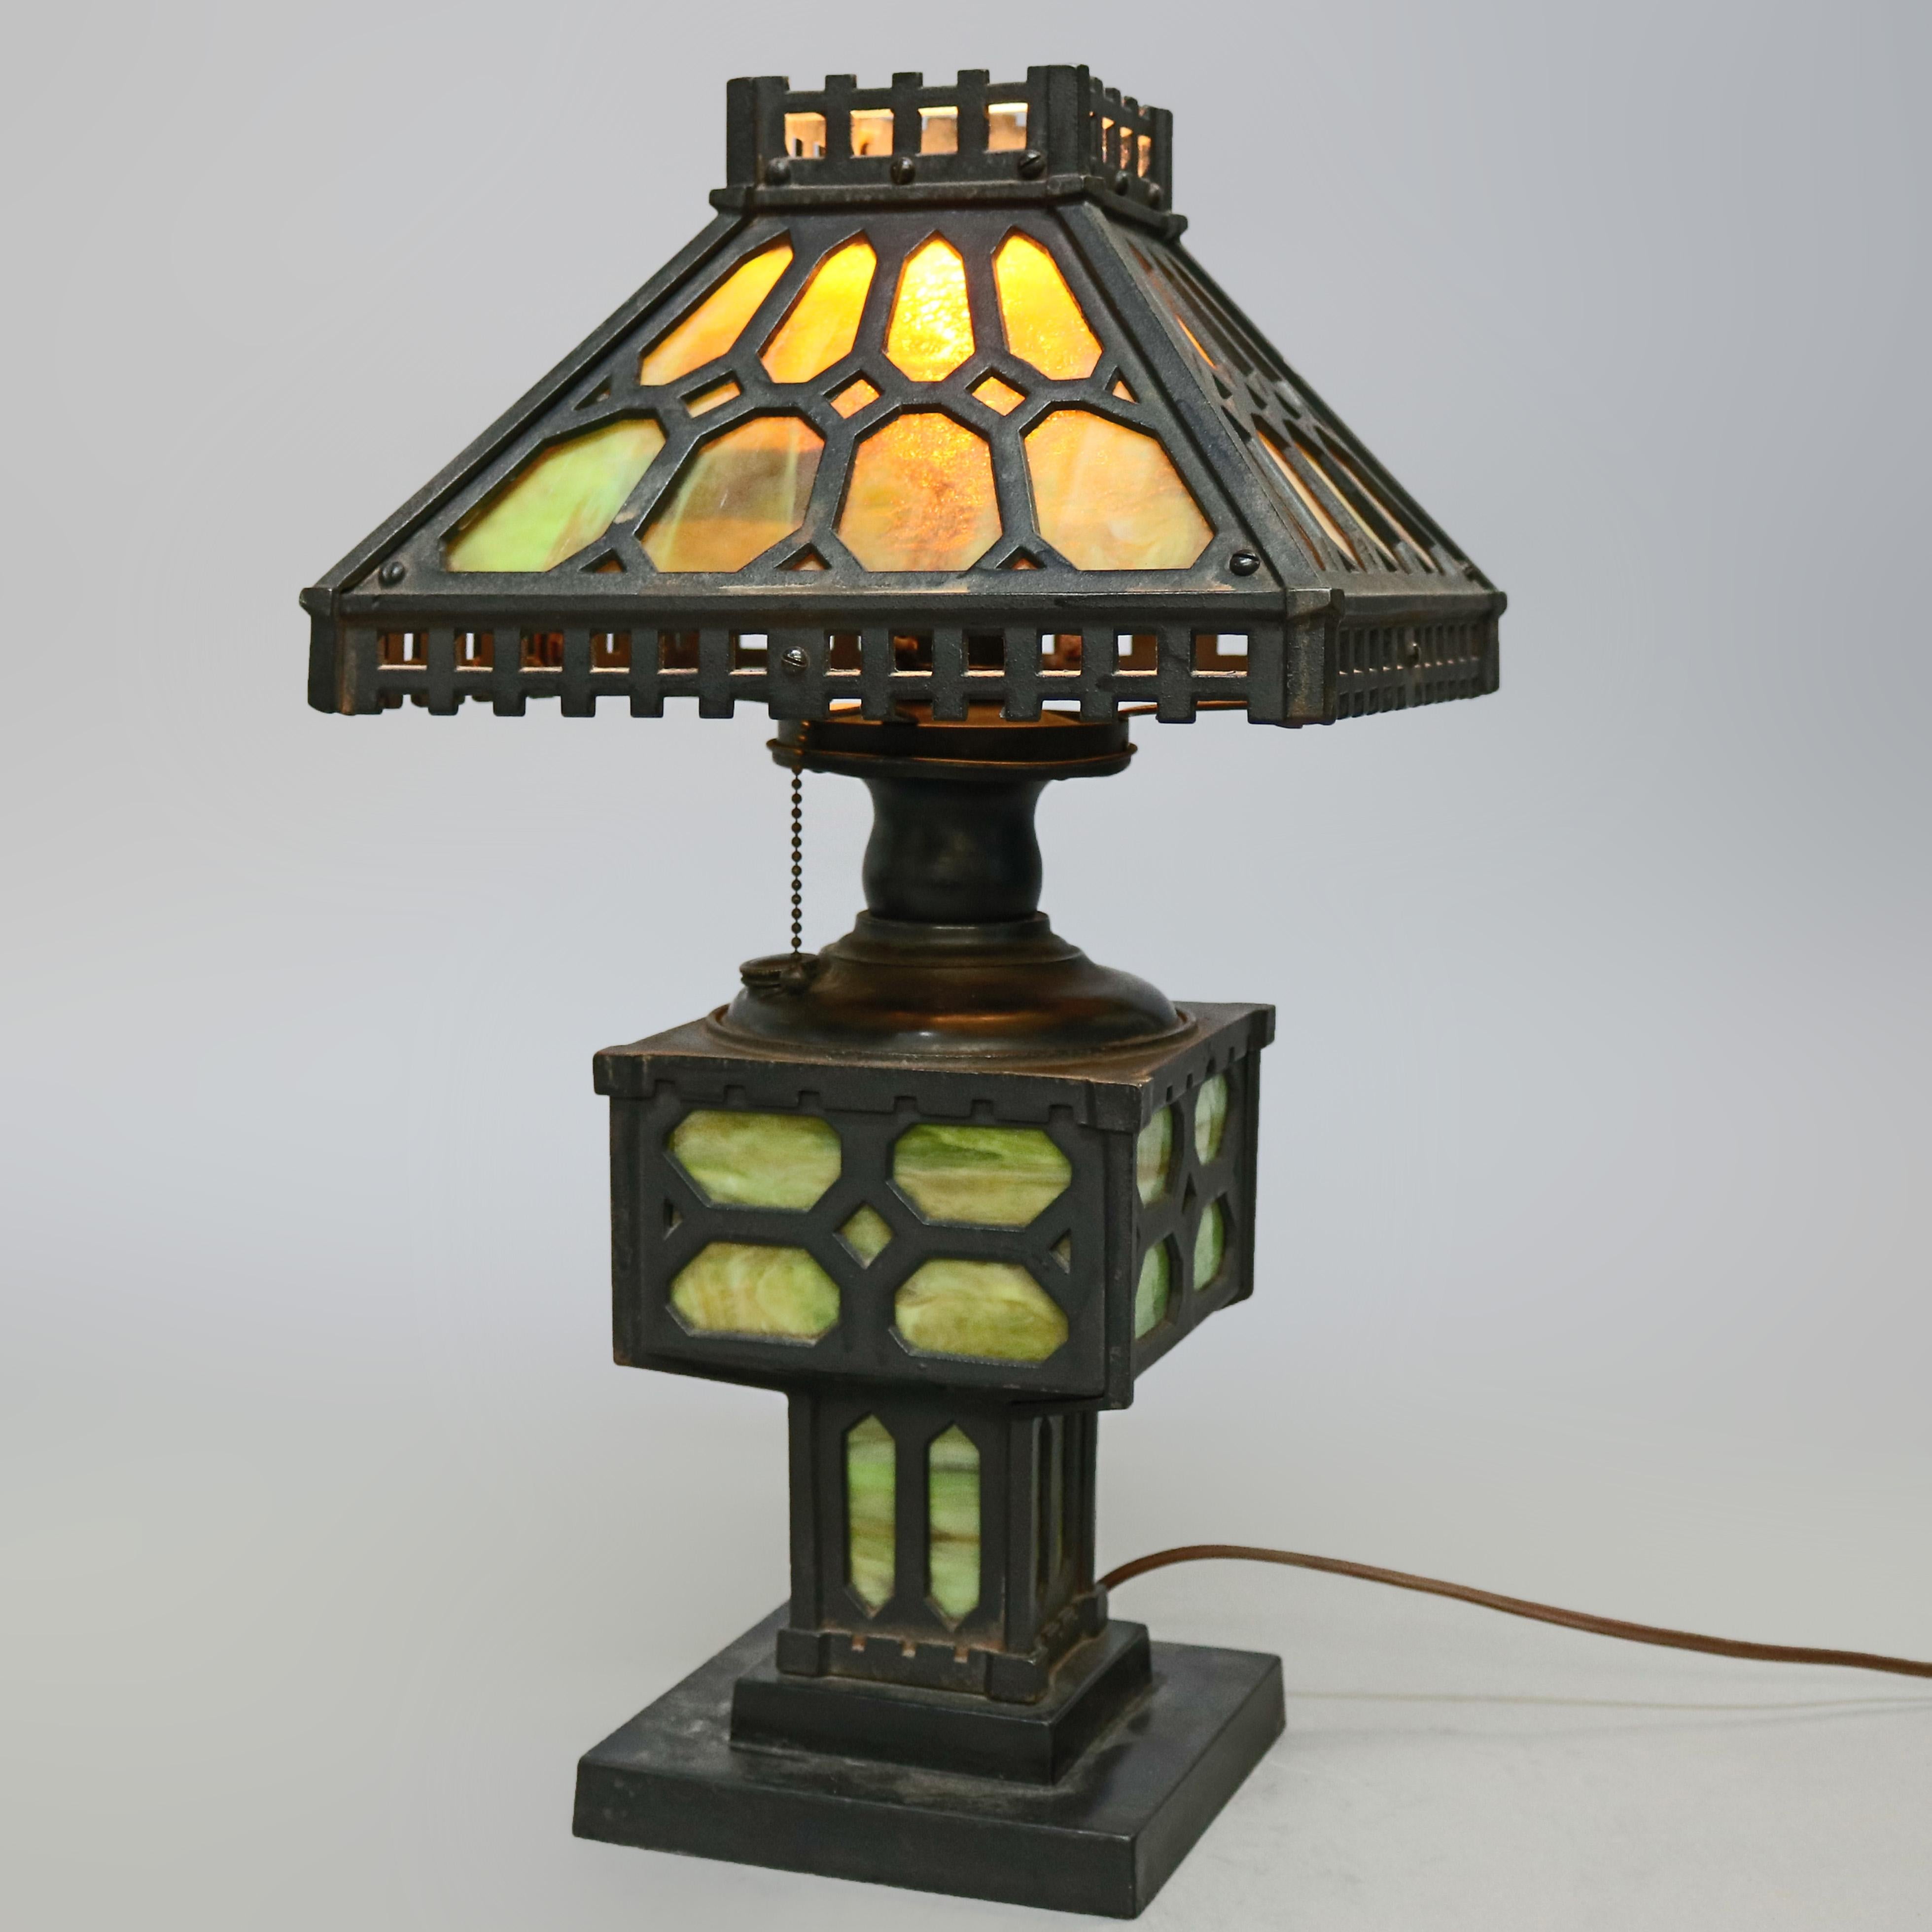 An antique Arts & Crafts Mission table lamp offers ebonized cast iron frame with slag glass panels throughout, single socket and electrified, attributed to Bradley & Hubbard, circa 1920

Measures- 20